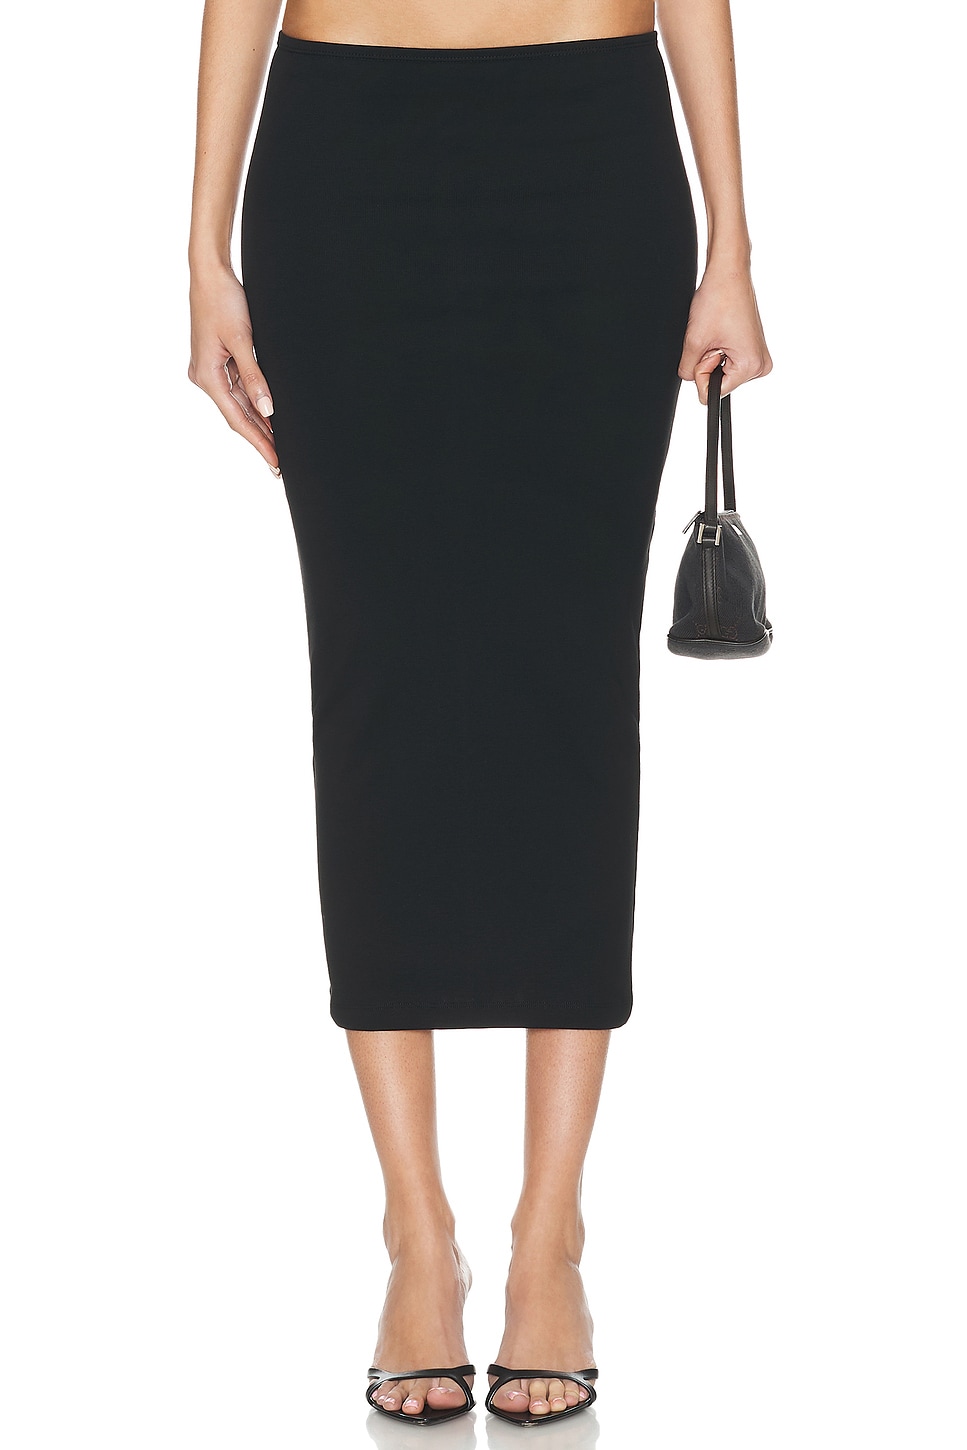 Image 1 of FLORE FLORE Liv Skirt in Black